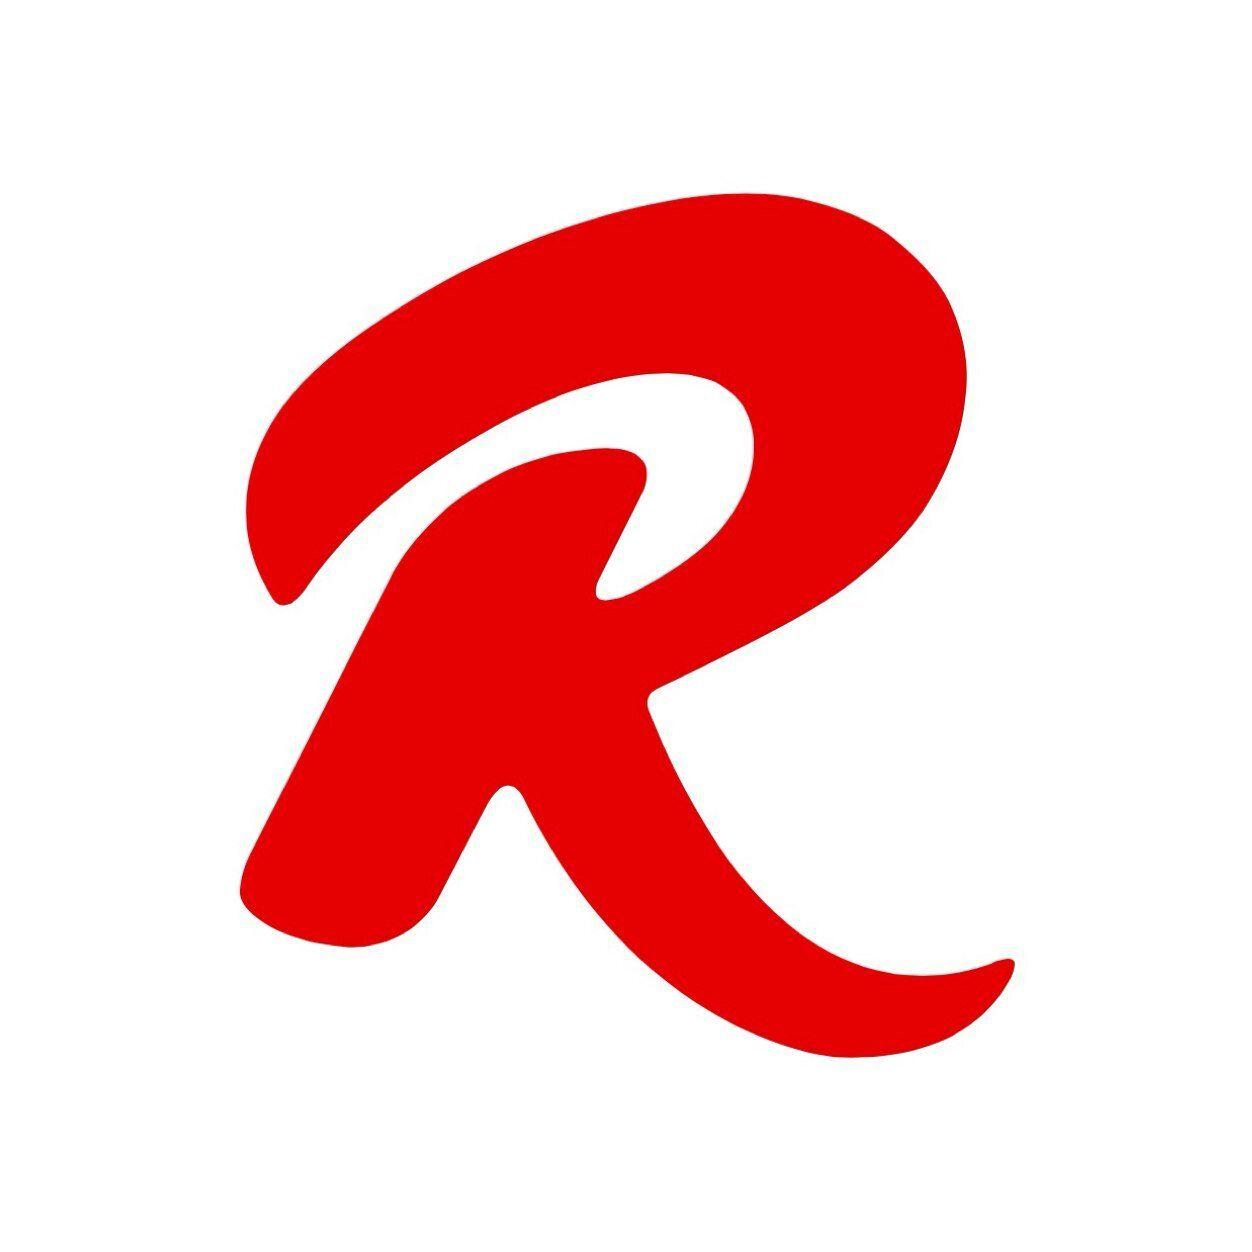 Cool Red R Logo - cool letter r - Kleo.wagenaardentistry.com